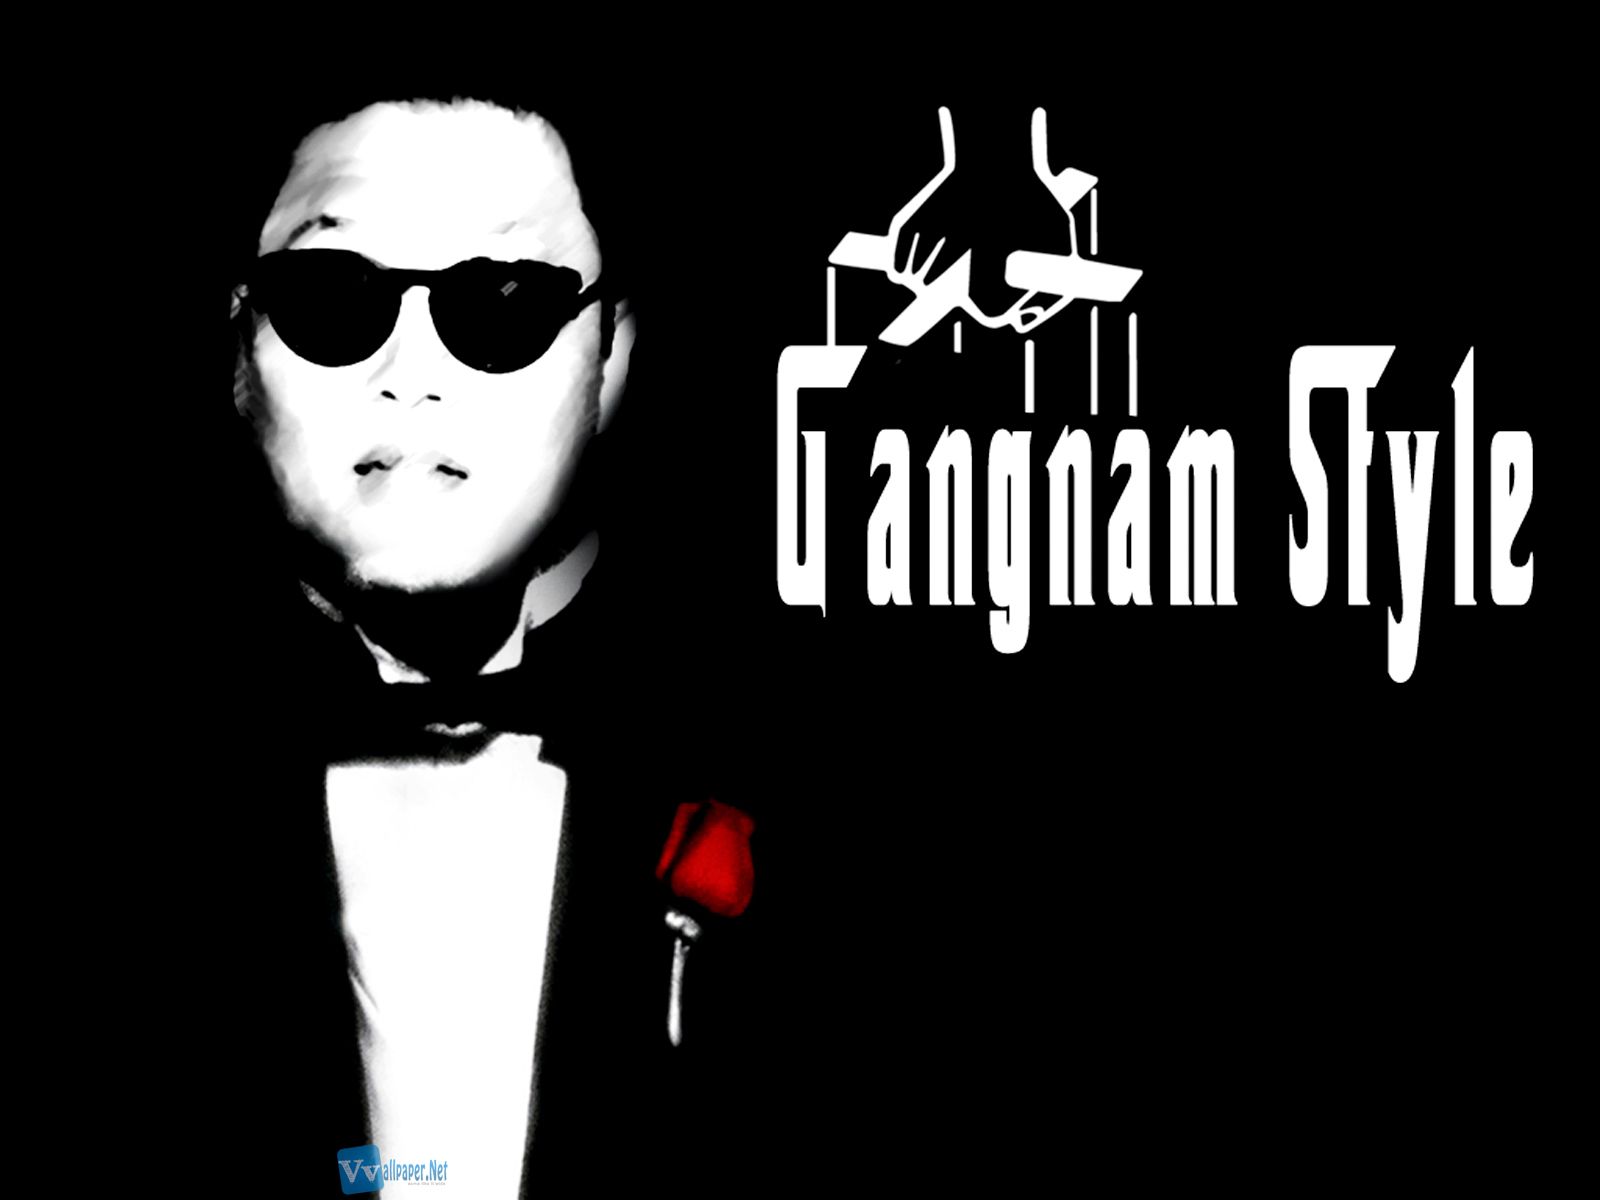 PSY the godfather wallpapers and images - wallpapers, pictures, photos